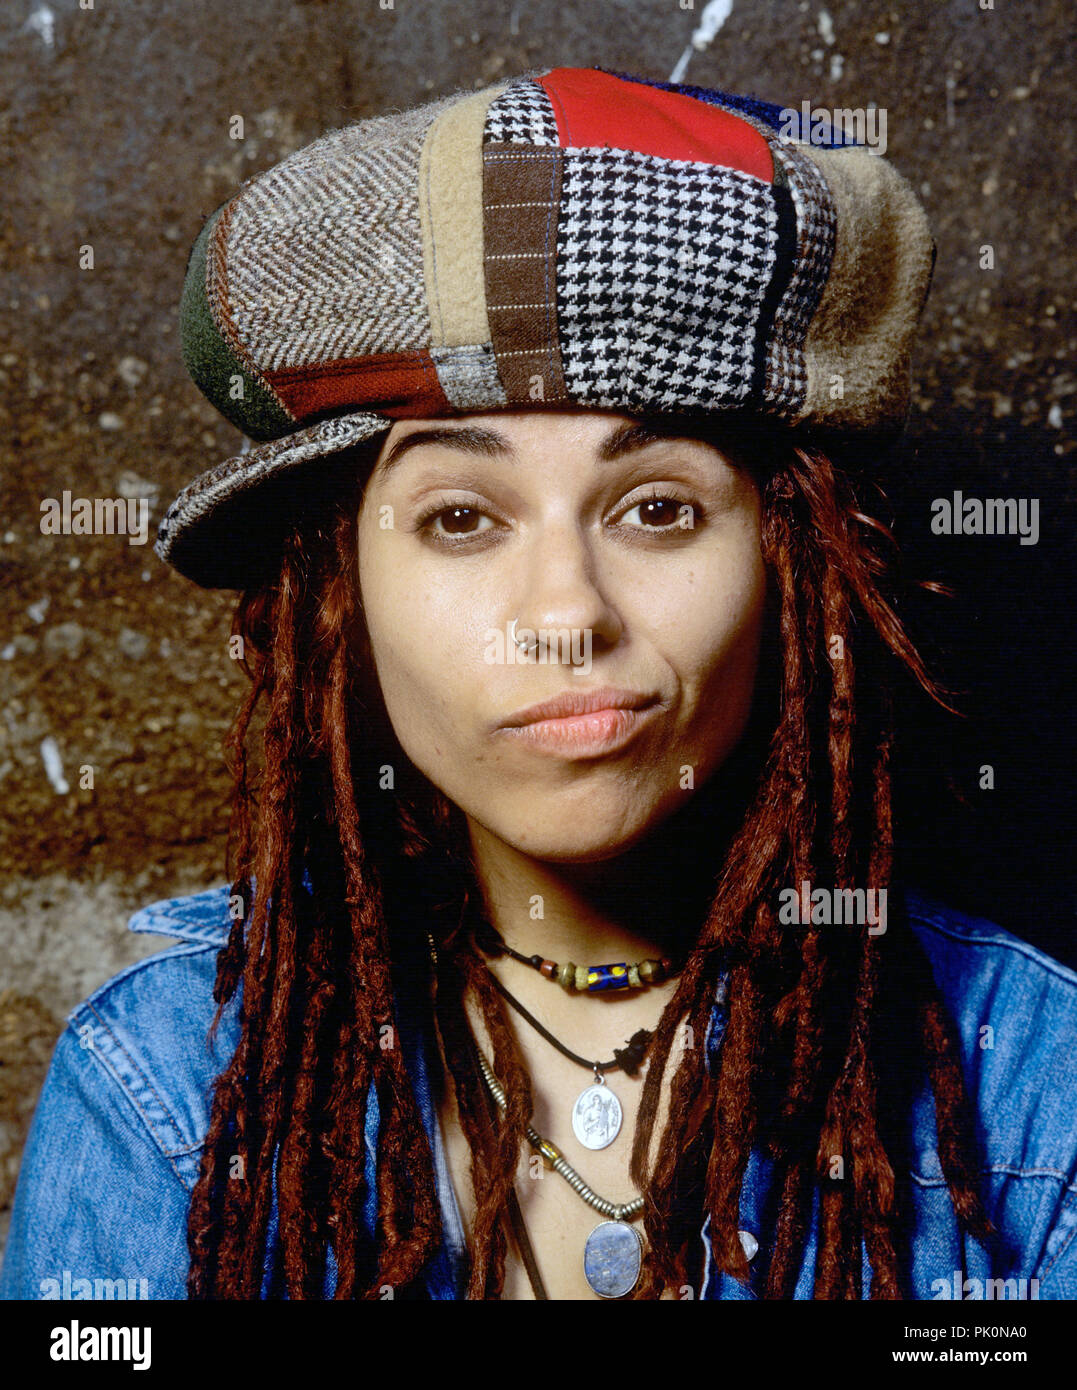 Linda Perry (4 Non Blondes) on 18.07.1993 in Bad Mergentheim. | usage  worldwide Stock Photo - Alamy